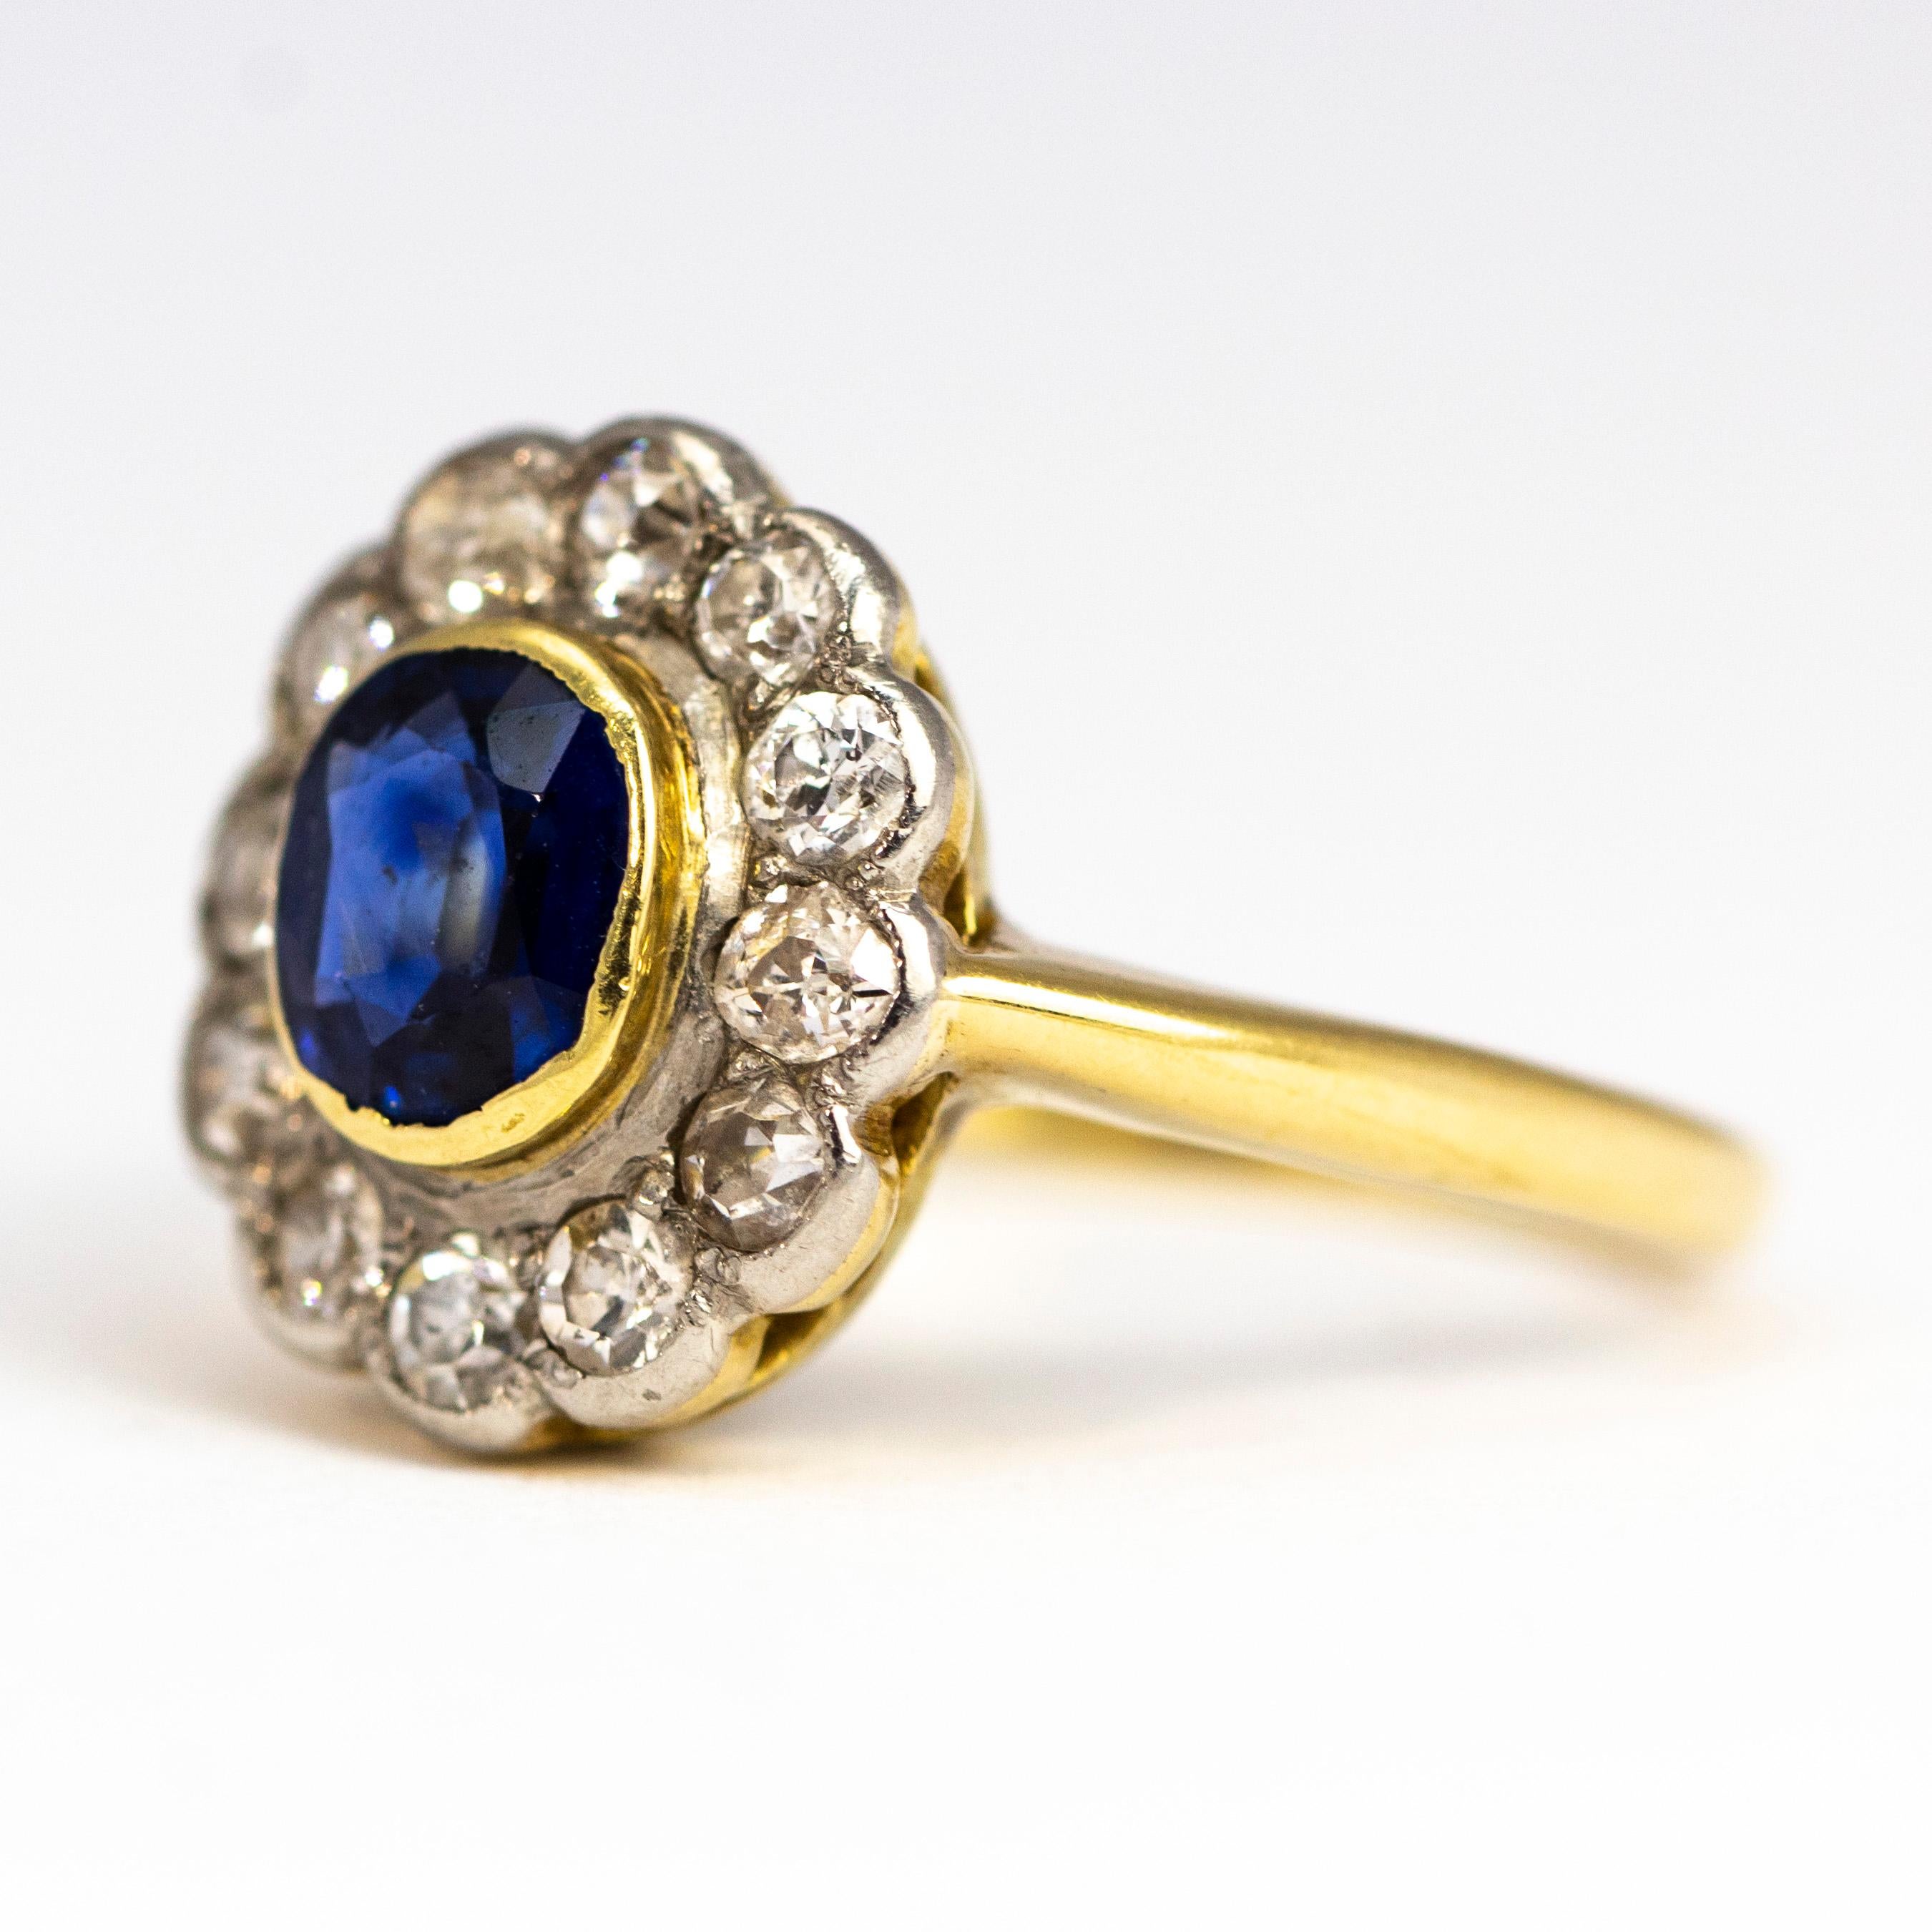 This classic design of a sapphire cluster ring is exquisite. It features a 70pt sapphire at the centre which is a wonderful deep blue and around it there are 60pts worth of Diamonds. All the stones are set in platinum and the ring itself is modelled